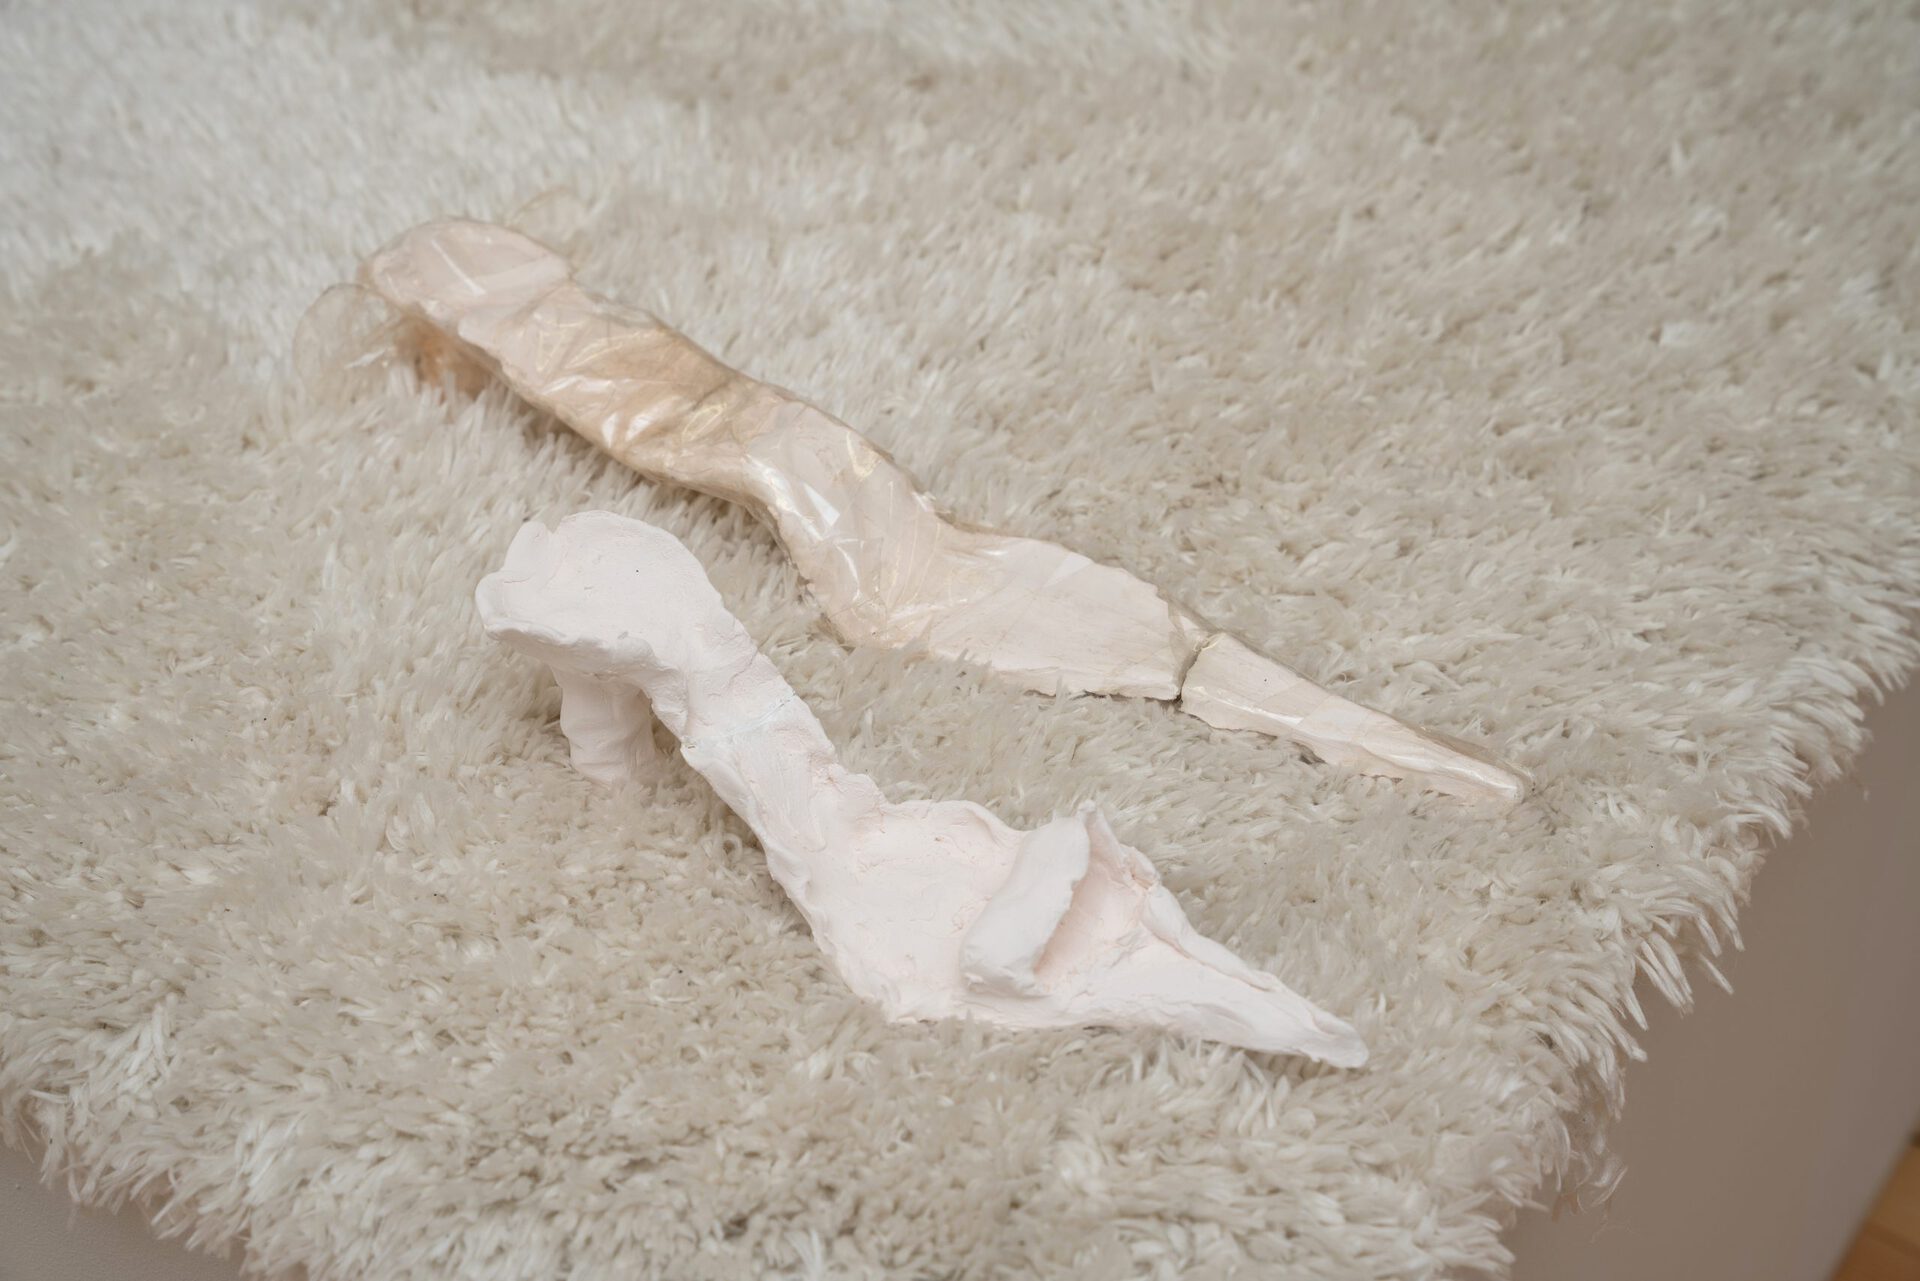 Carla Milentis, Silky, 2021, Porcelain and tile glue, 28 x 7 x 8cm and Got to Give it Up, 2021, Porcelain and packing tape, 43 x 5 x 4cm